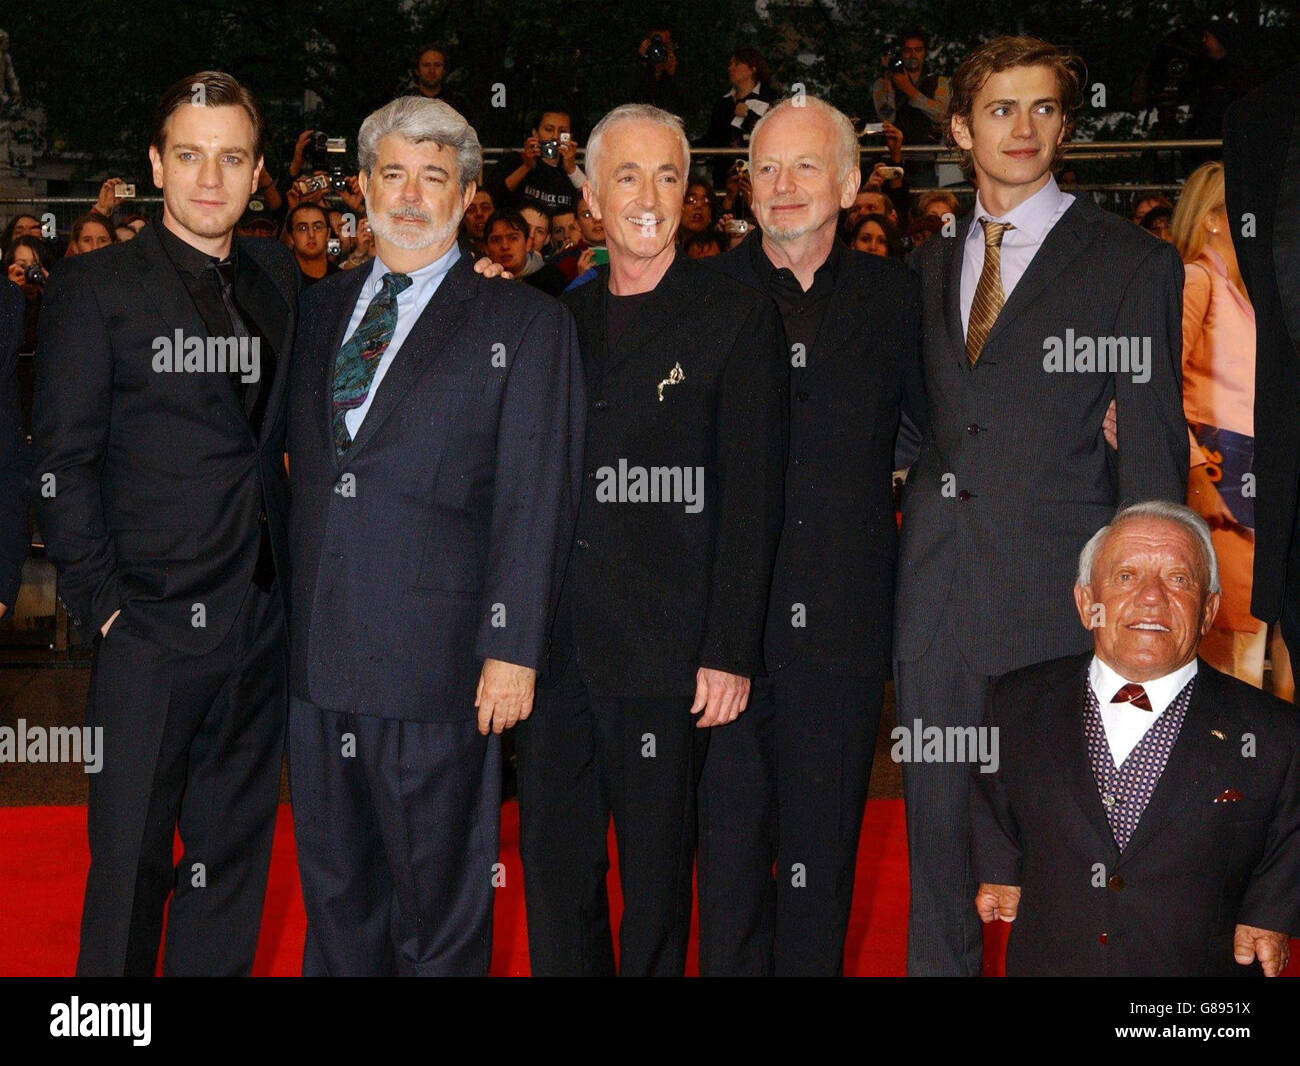 (From left to right) cast member Ewan McGregor, director George Lucas, cast members Anthony Daniels, Ian McDiarmid, Hayden Christensen and Kevin Baker. Stock Photo